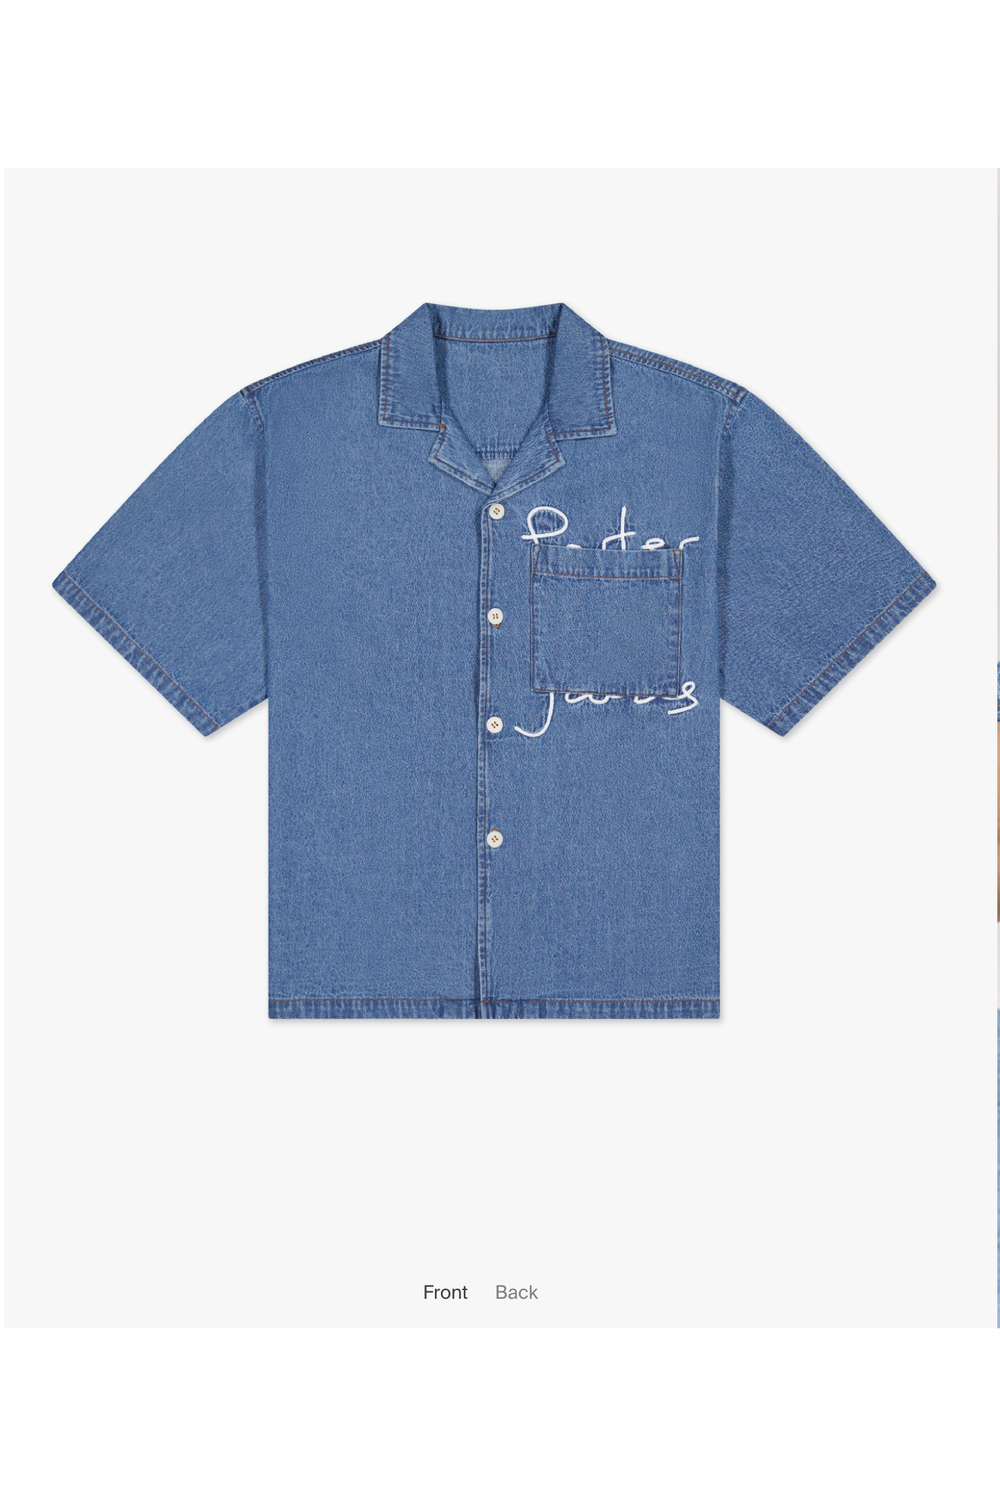 Revere Shirt With Script / Chambray Denim | PORTER JAMES SPORTS | Mad About The Boy